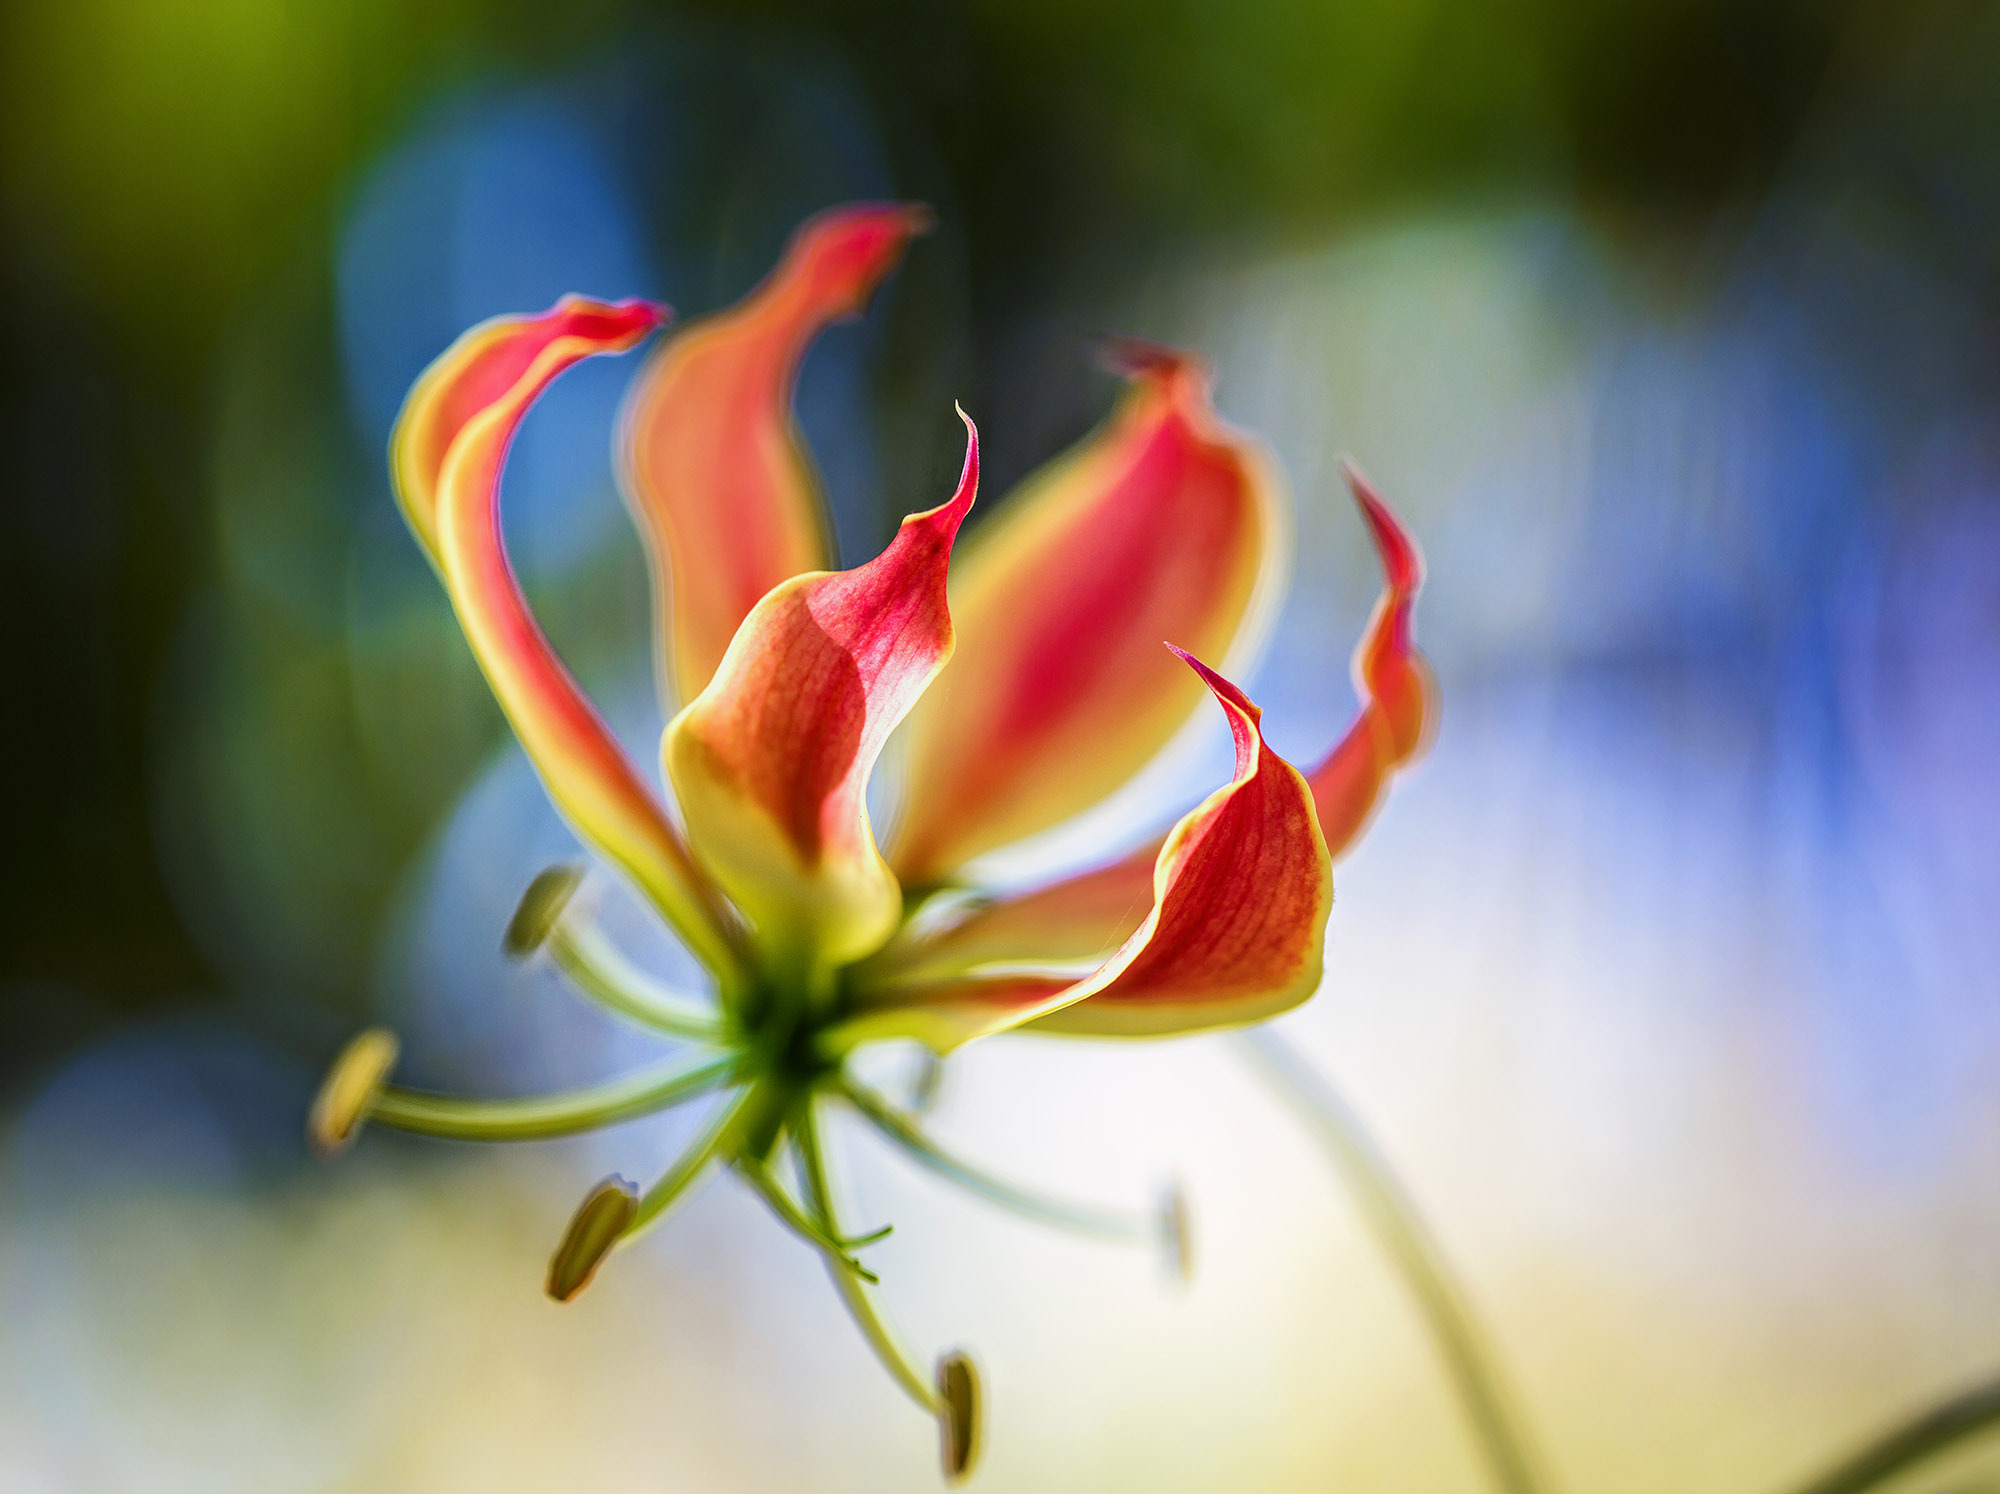 Flame Lily Full HD